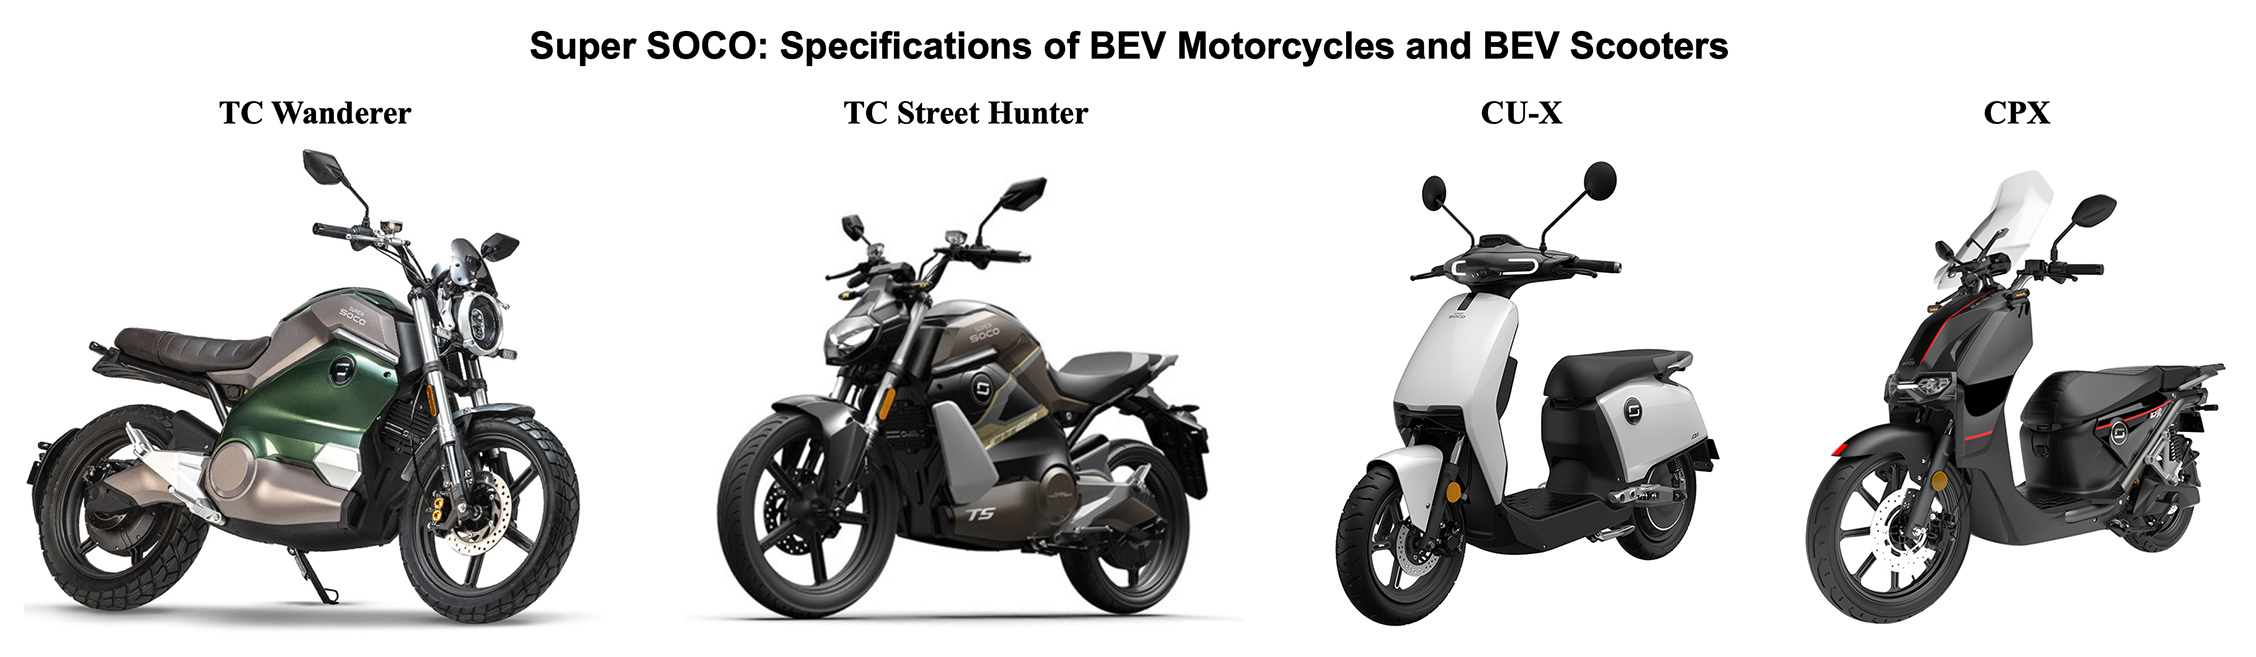 Super SOCO: Specifications of BEV Motorcycles and BEV Scooters